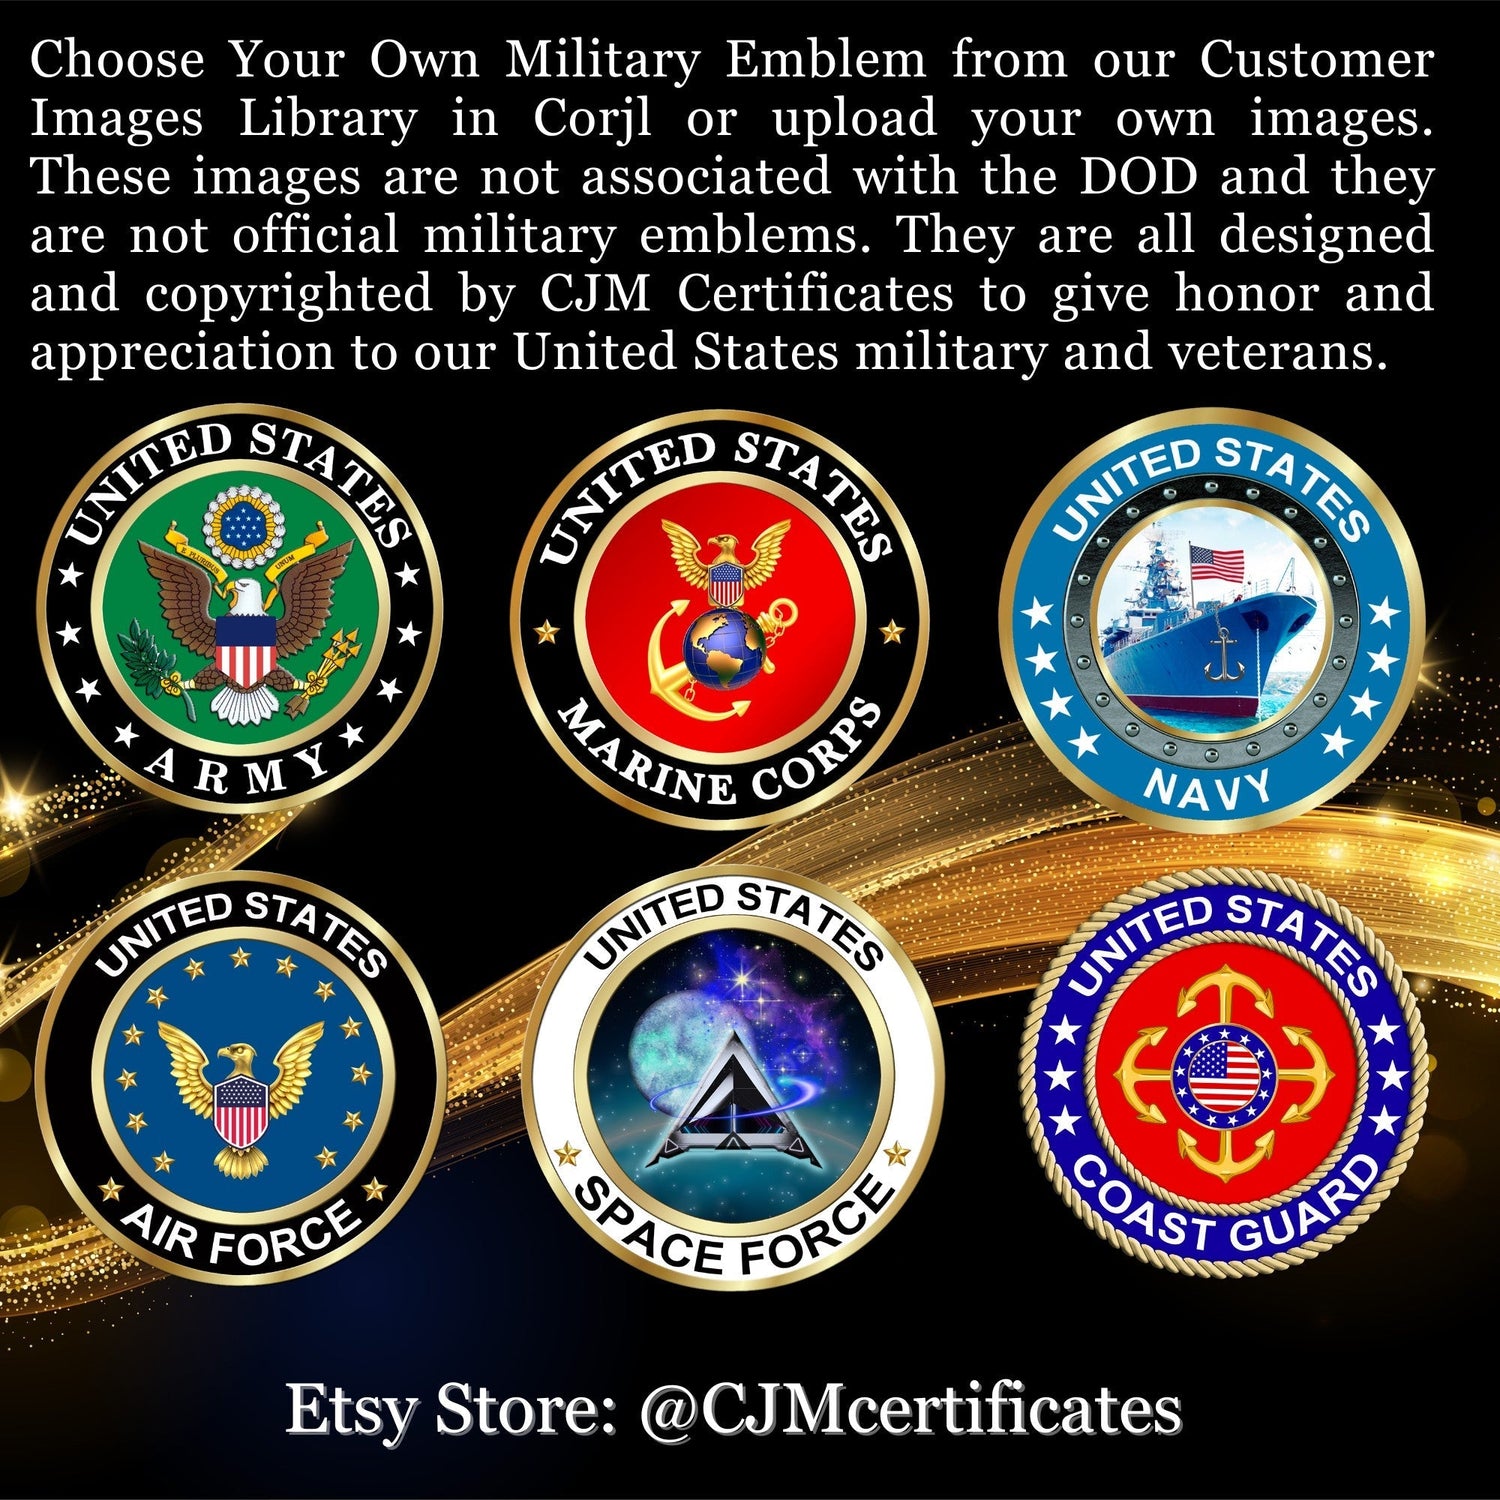 Choose Your Own Military Emblem for Your Certificate Designs